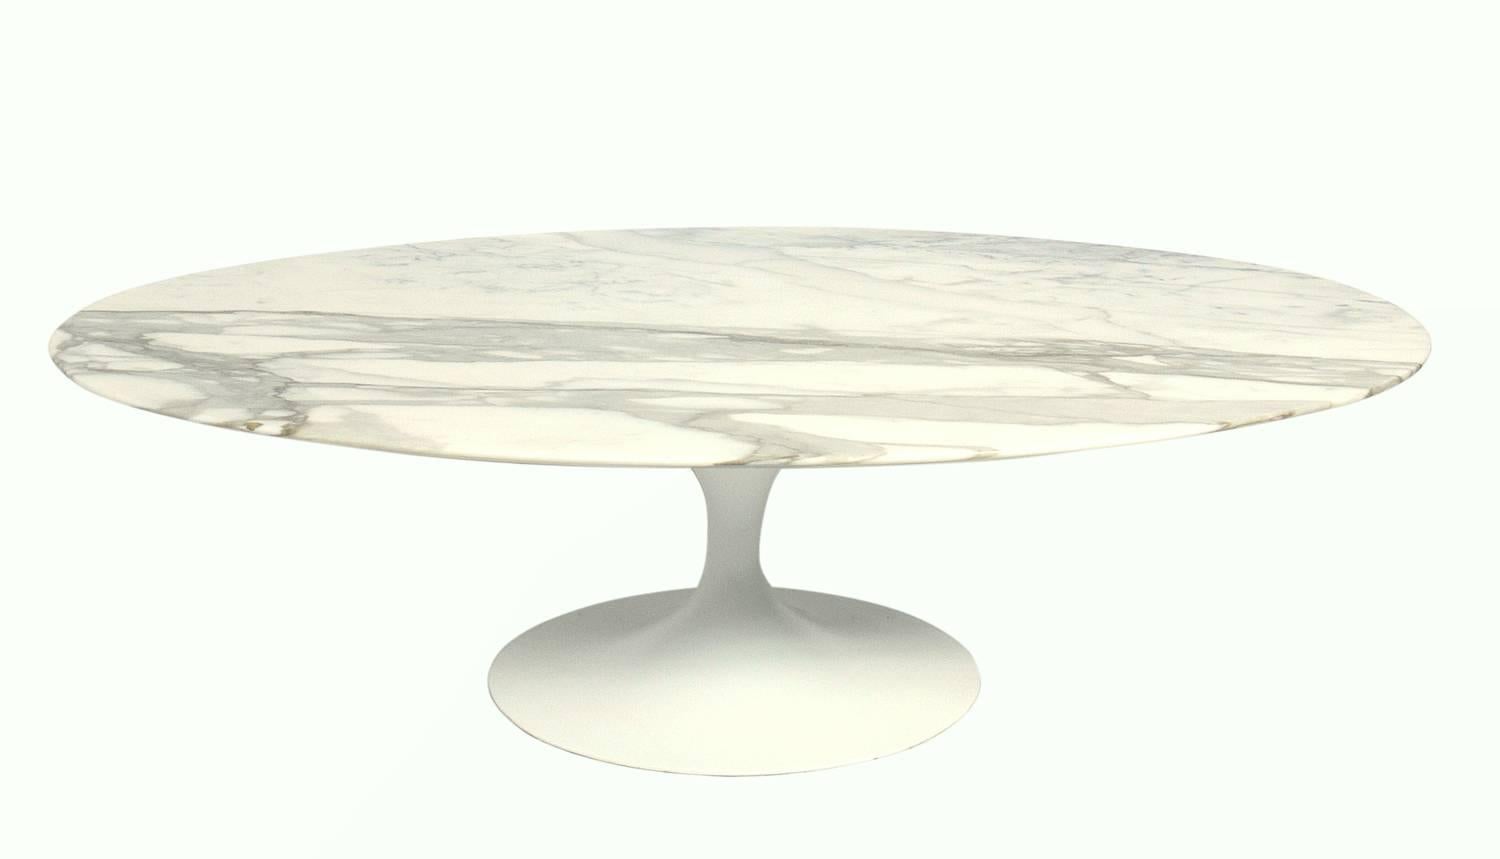 Oval marble-top tulip coffee table, designed by Eero Saarinen for Knoll, American, circa 1960s.